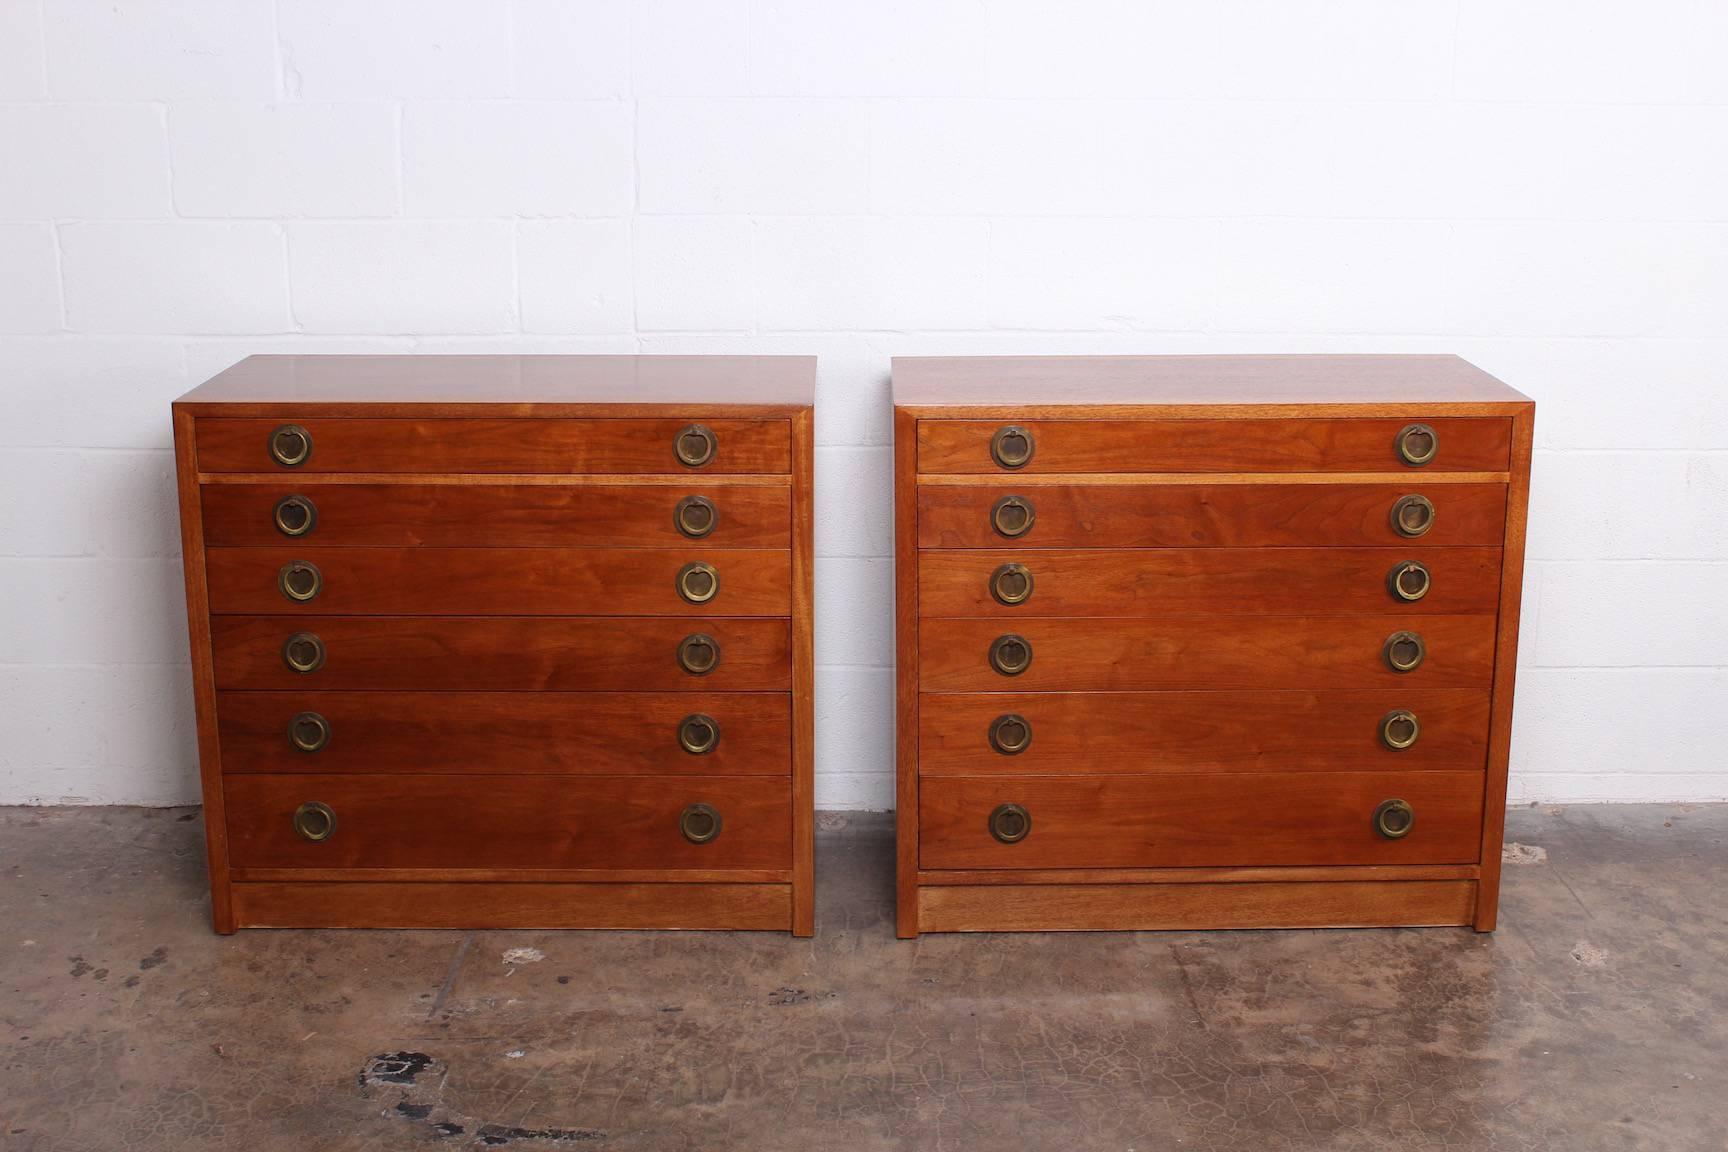 A pair of matching walnut and bleached mahogany chests with brass hardware. Designed by Edward Wormley for Dunbar.